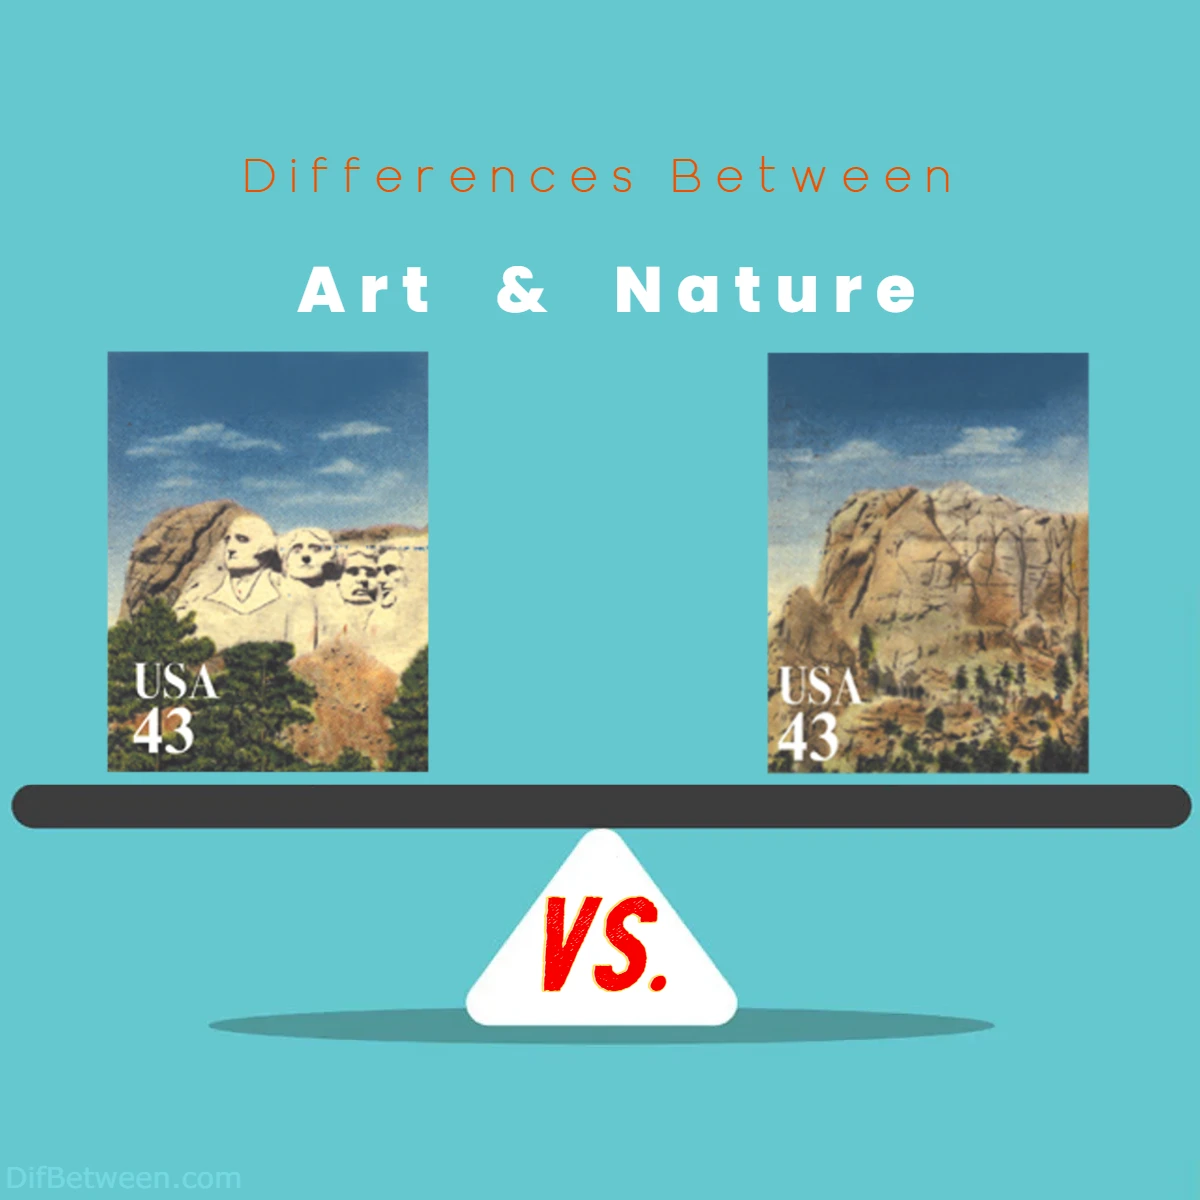 Differences Between Art vs Nature